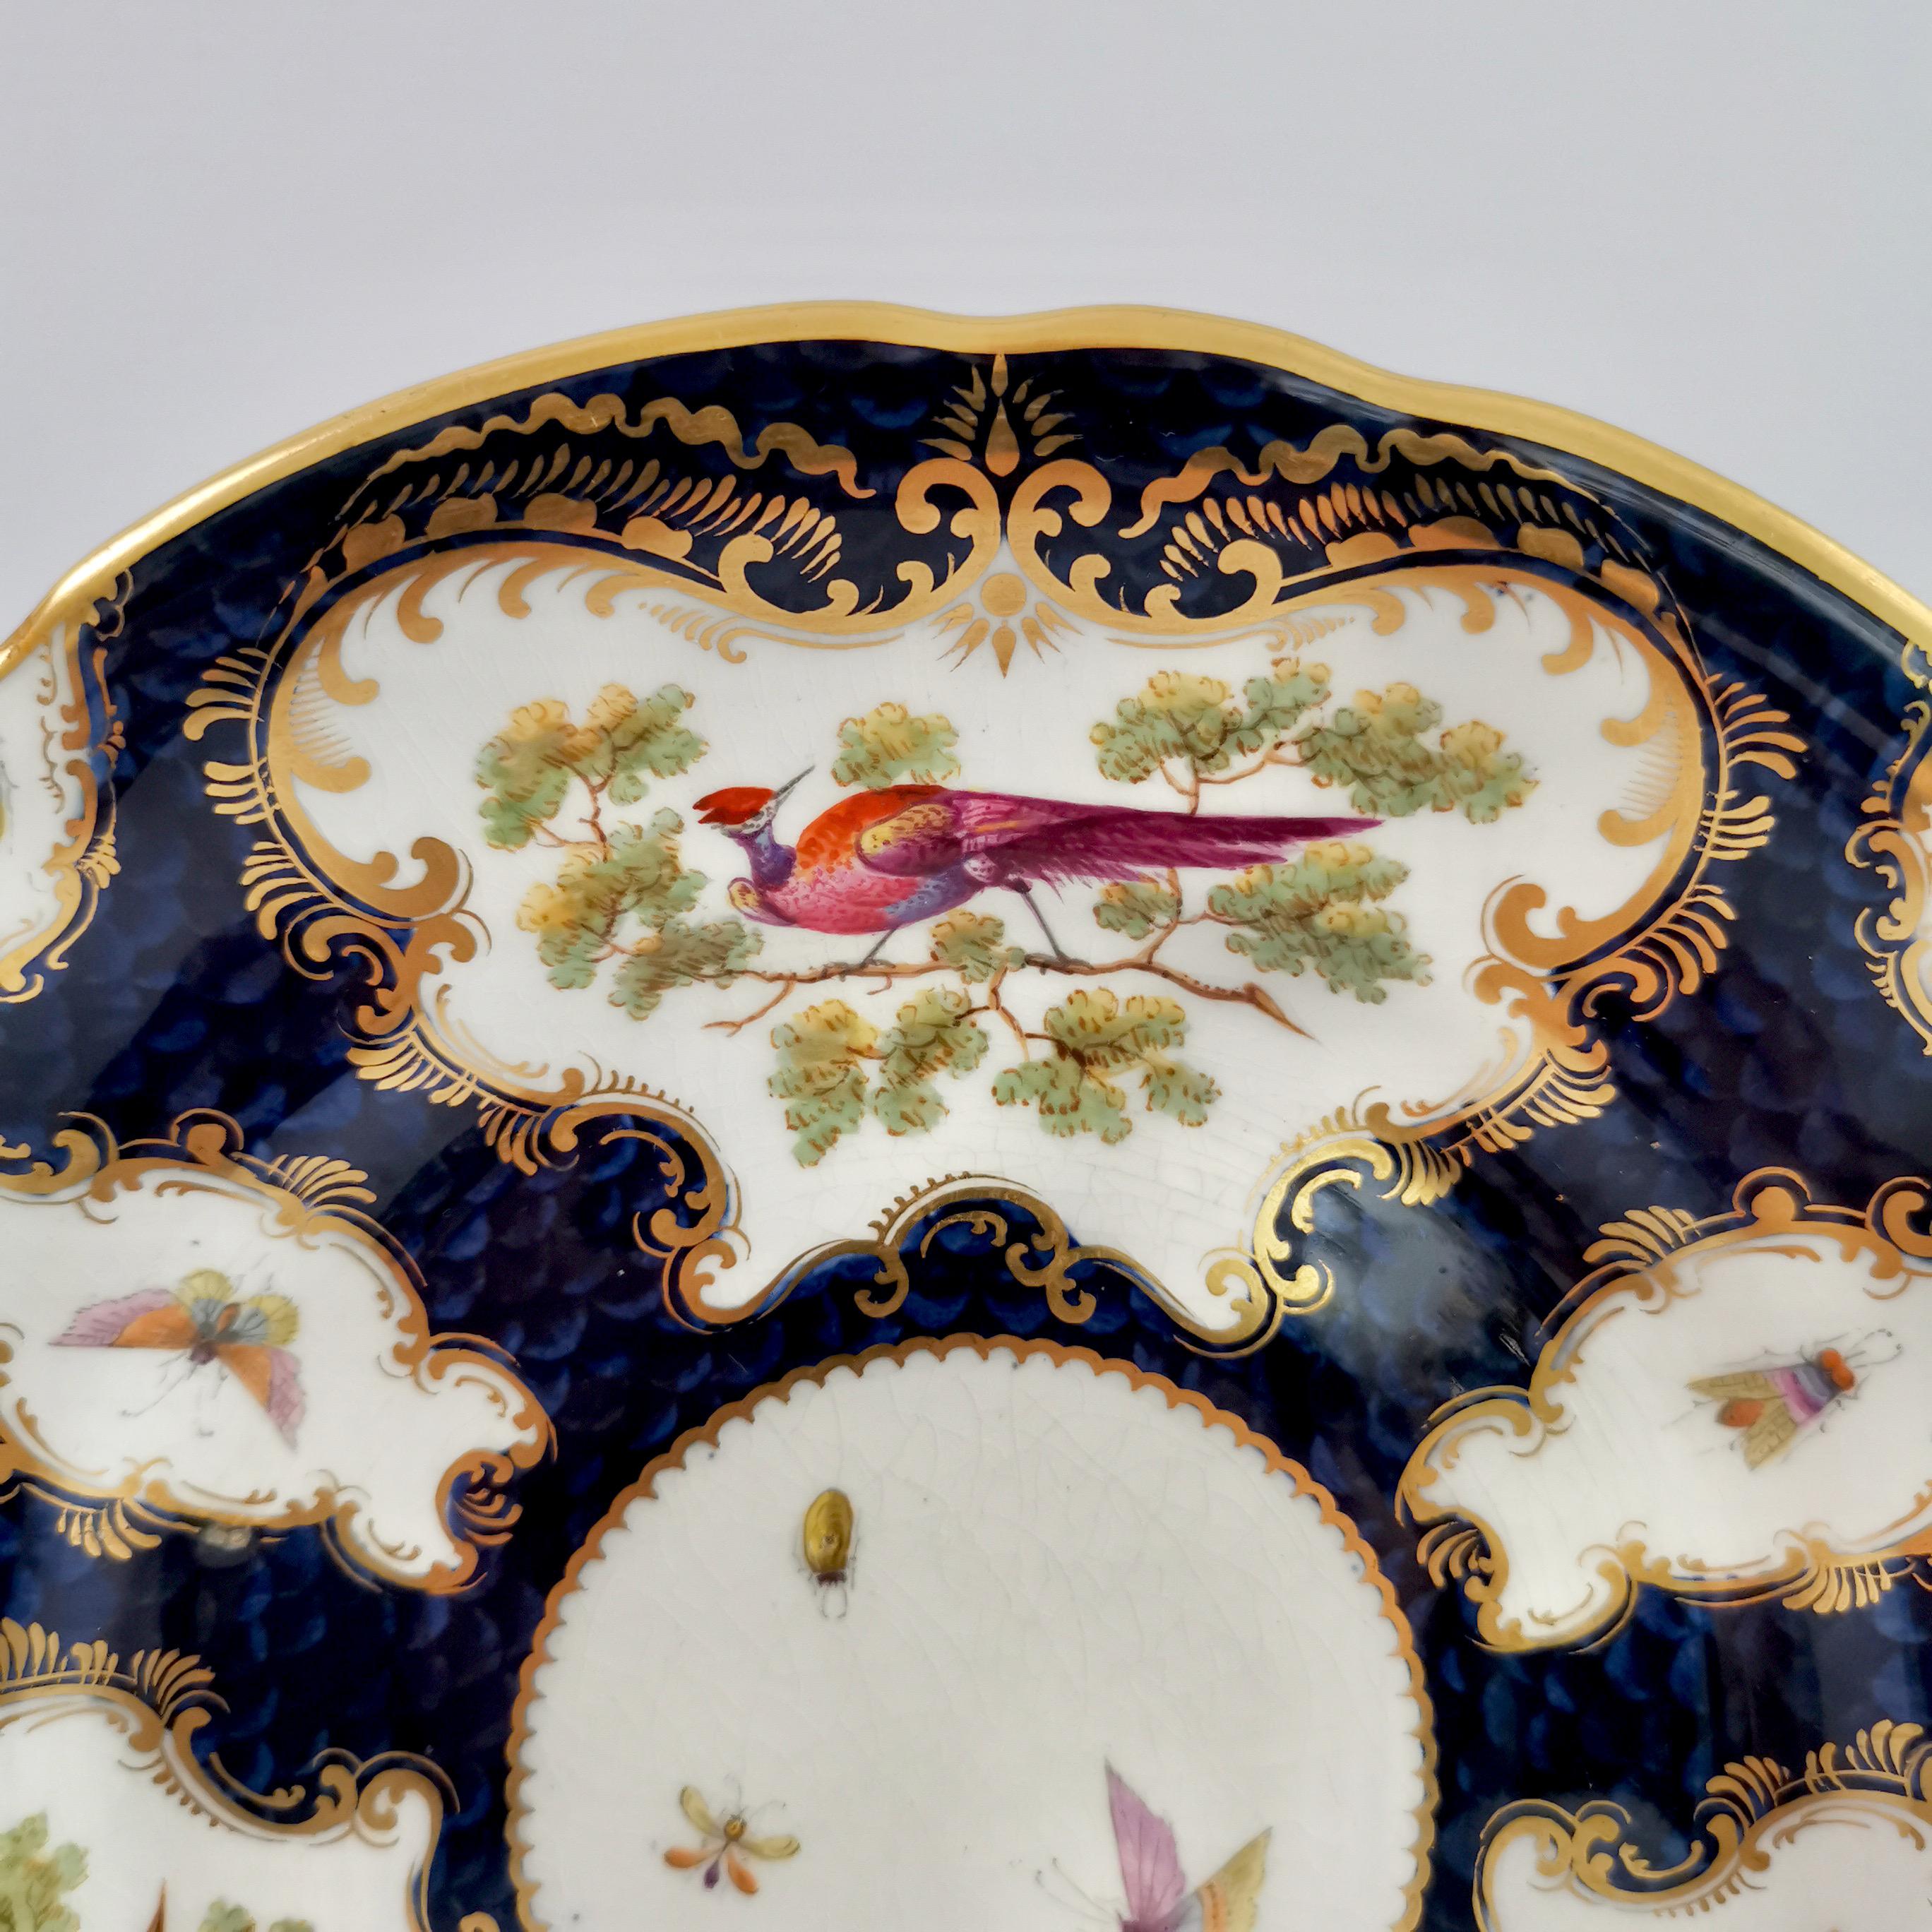 Hand-Painted Grainger Worcester Porcelain Plate, Blue Sèvres Birds and Insects circa 1880 '2'